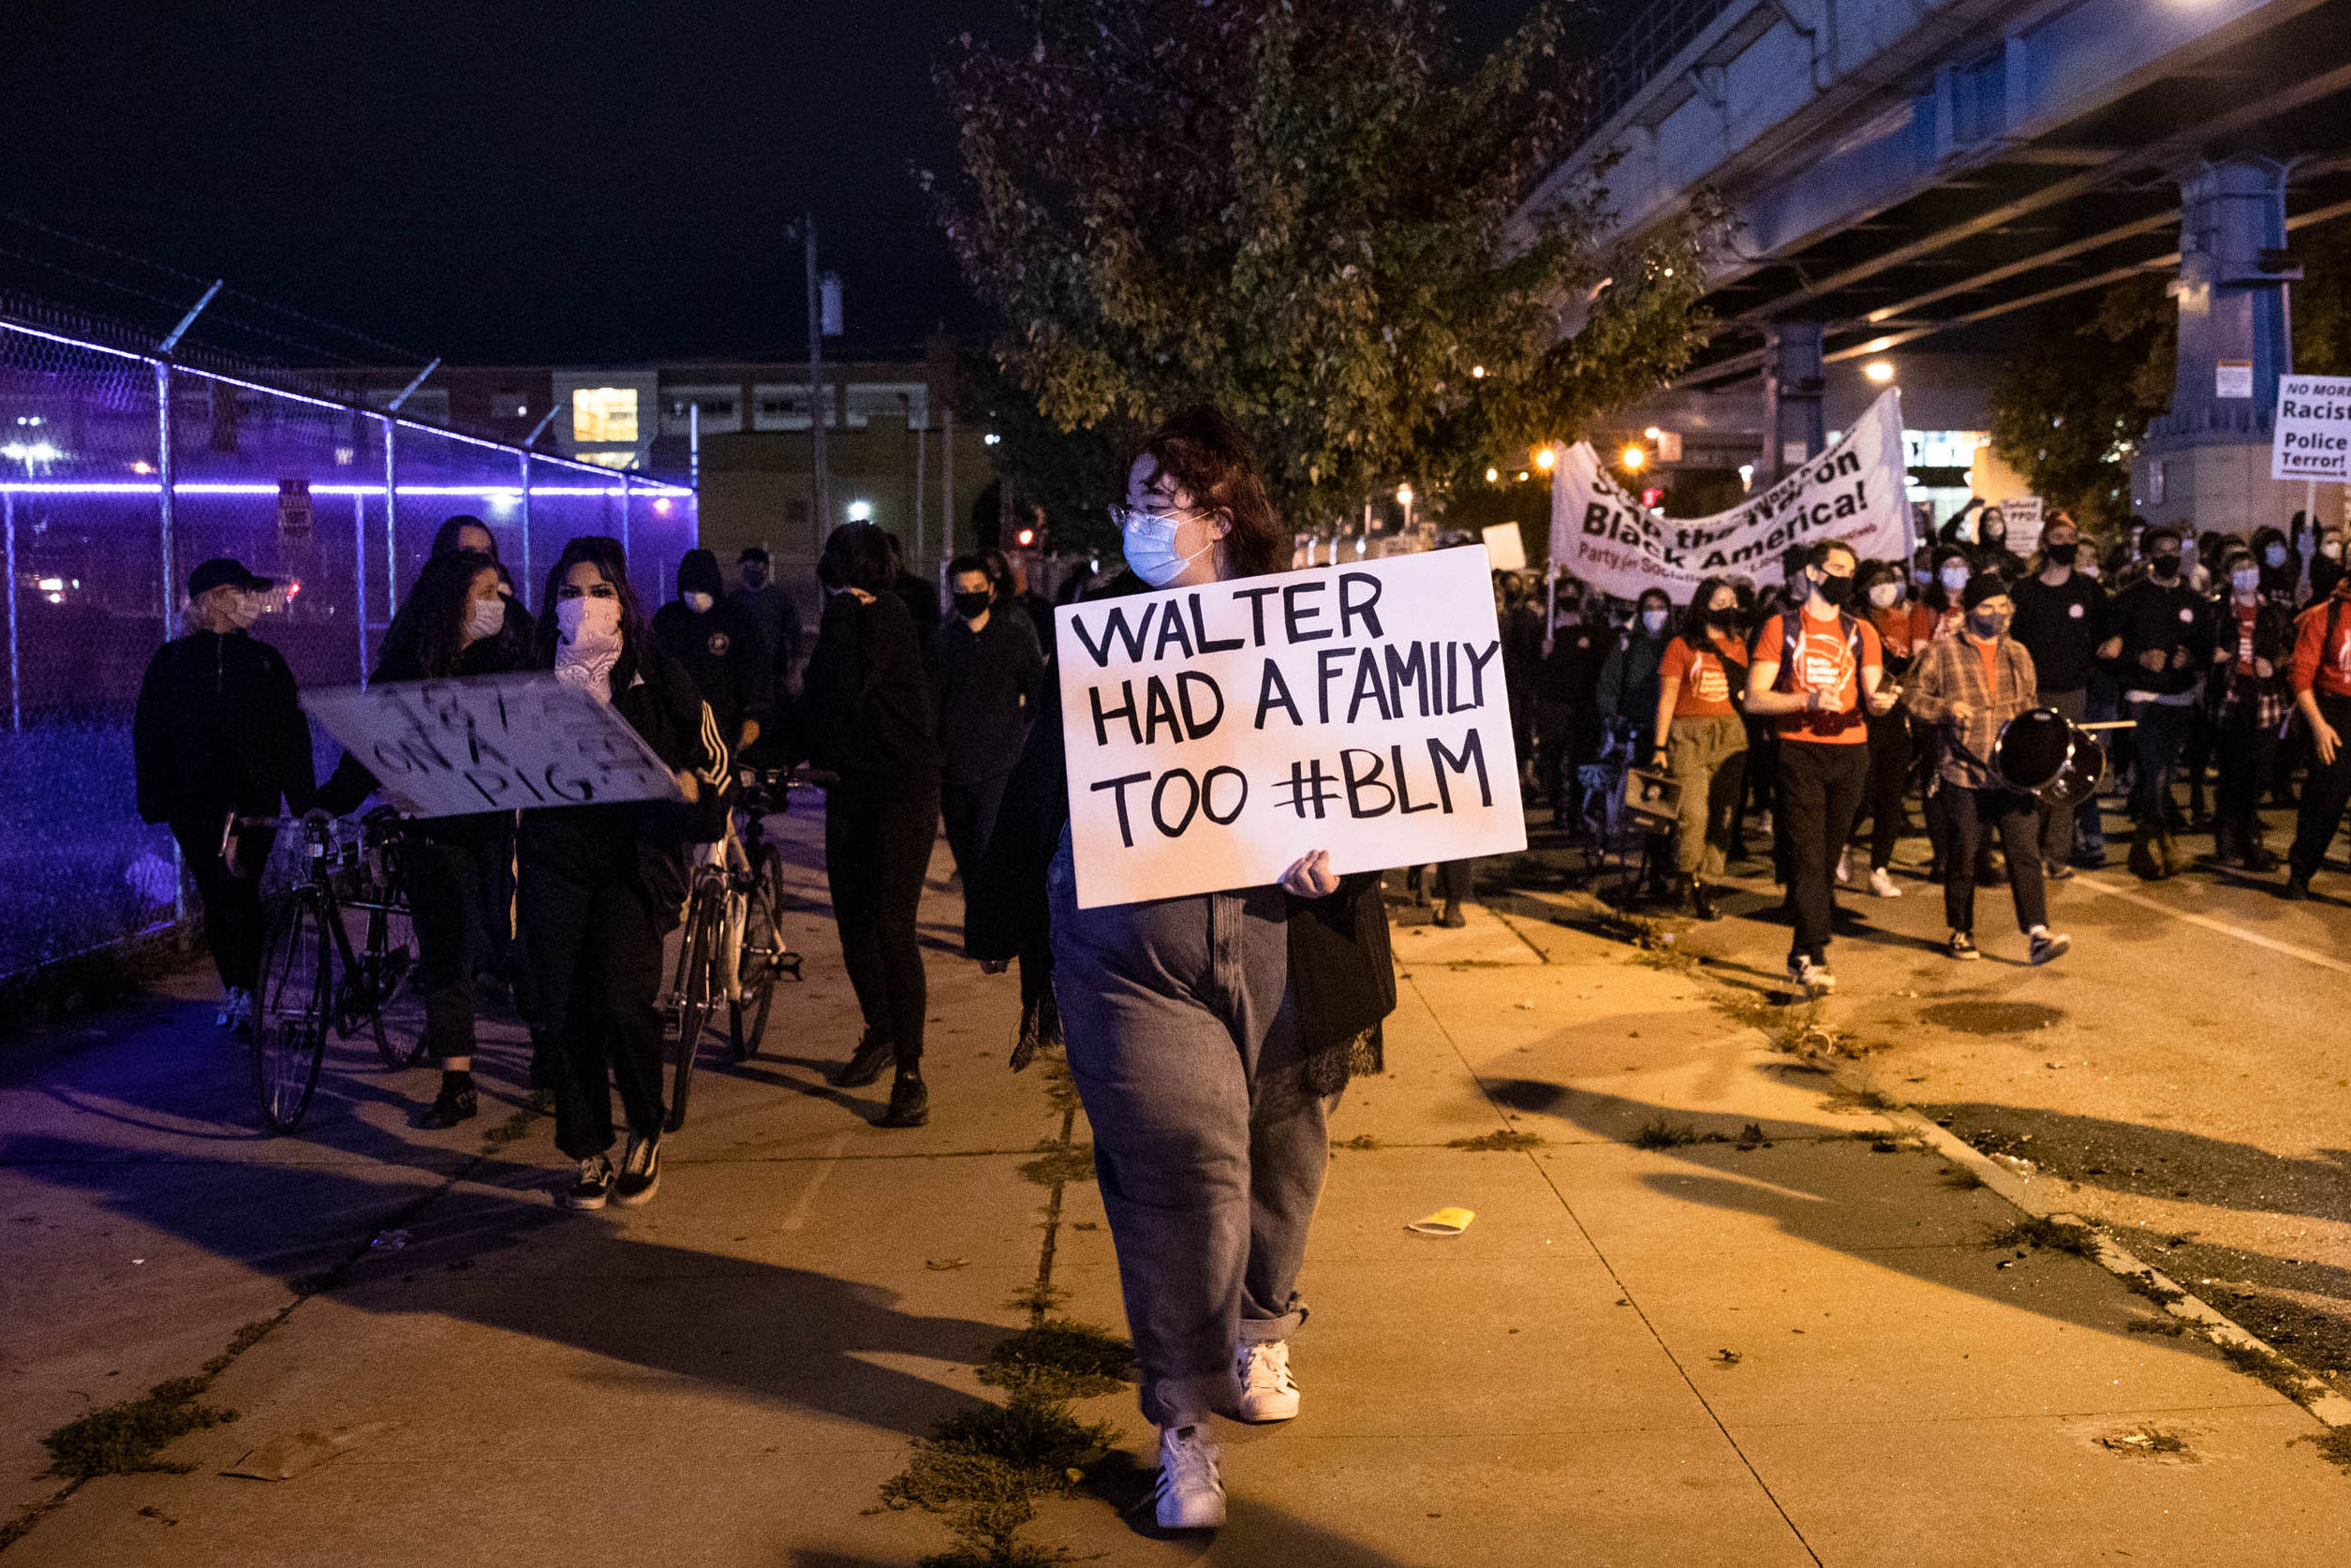 Philadelphia imposes curfew after fresh protests erupt over police shooting of Walter Wallace